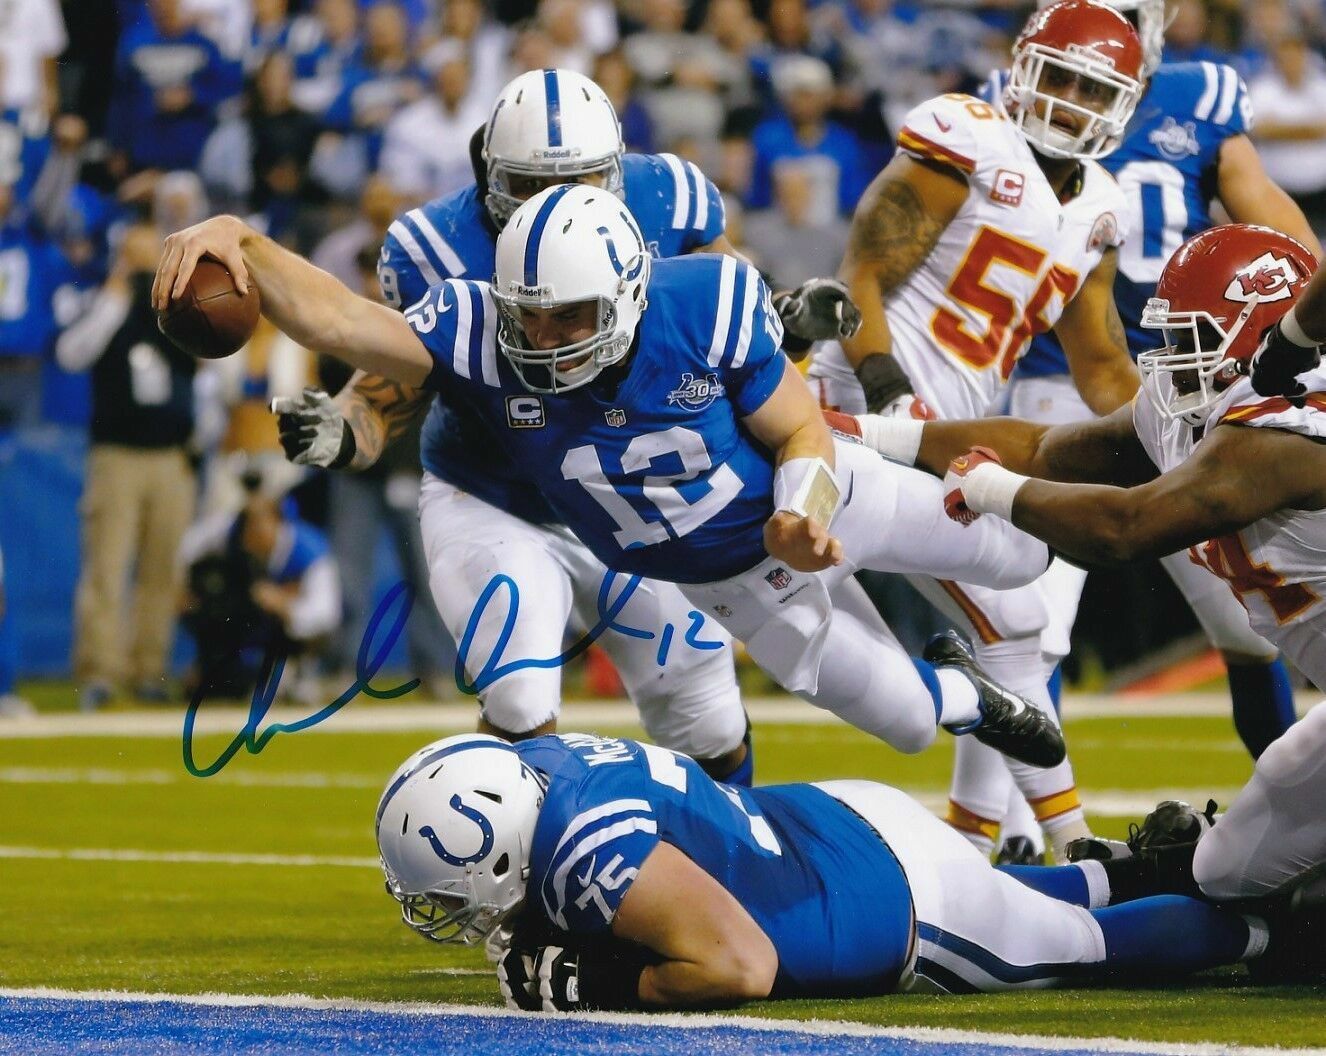 Andrew Luck Autographed Signed 8x10 Photo Poster painting ( Colts ) REPRINT ,